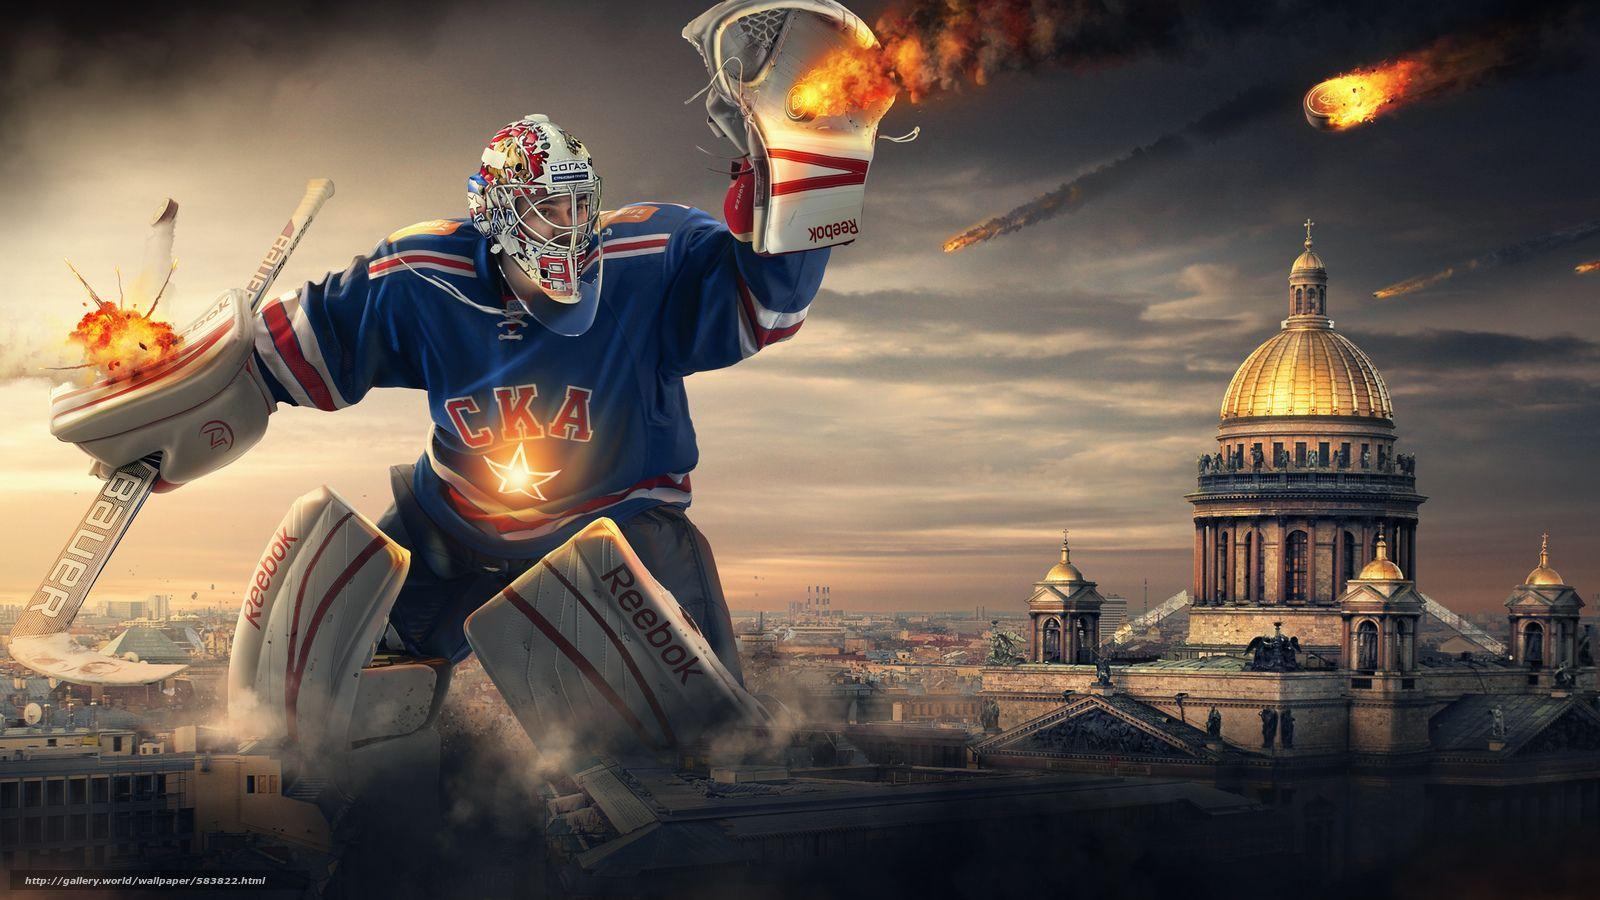 Ice Hockey Wallpaper 74 images